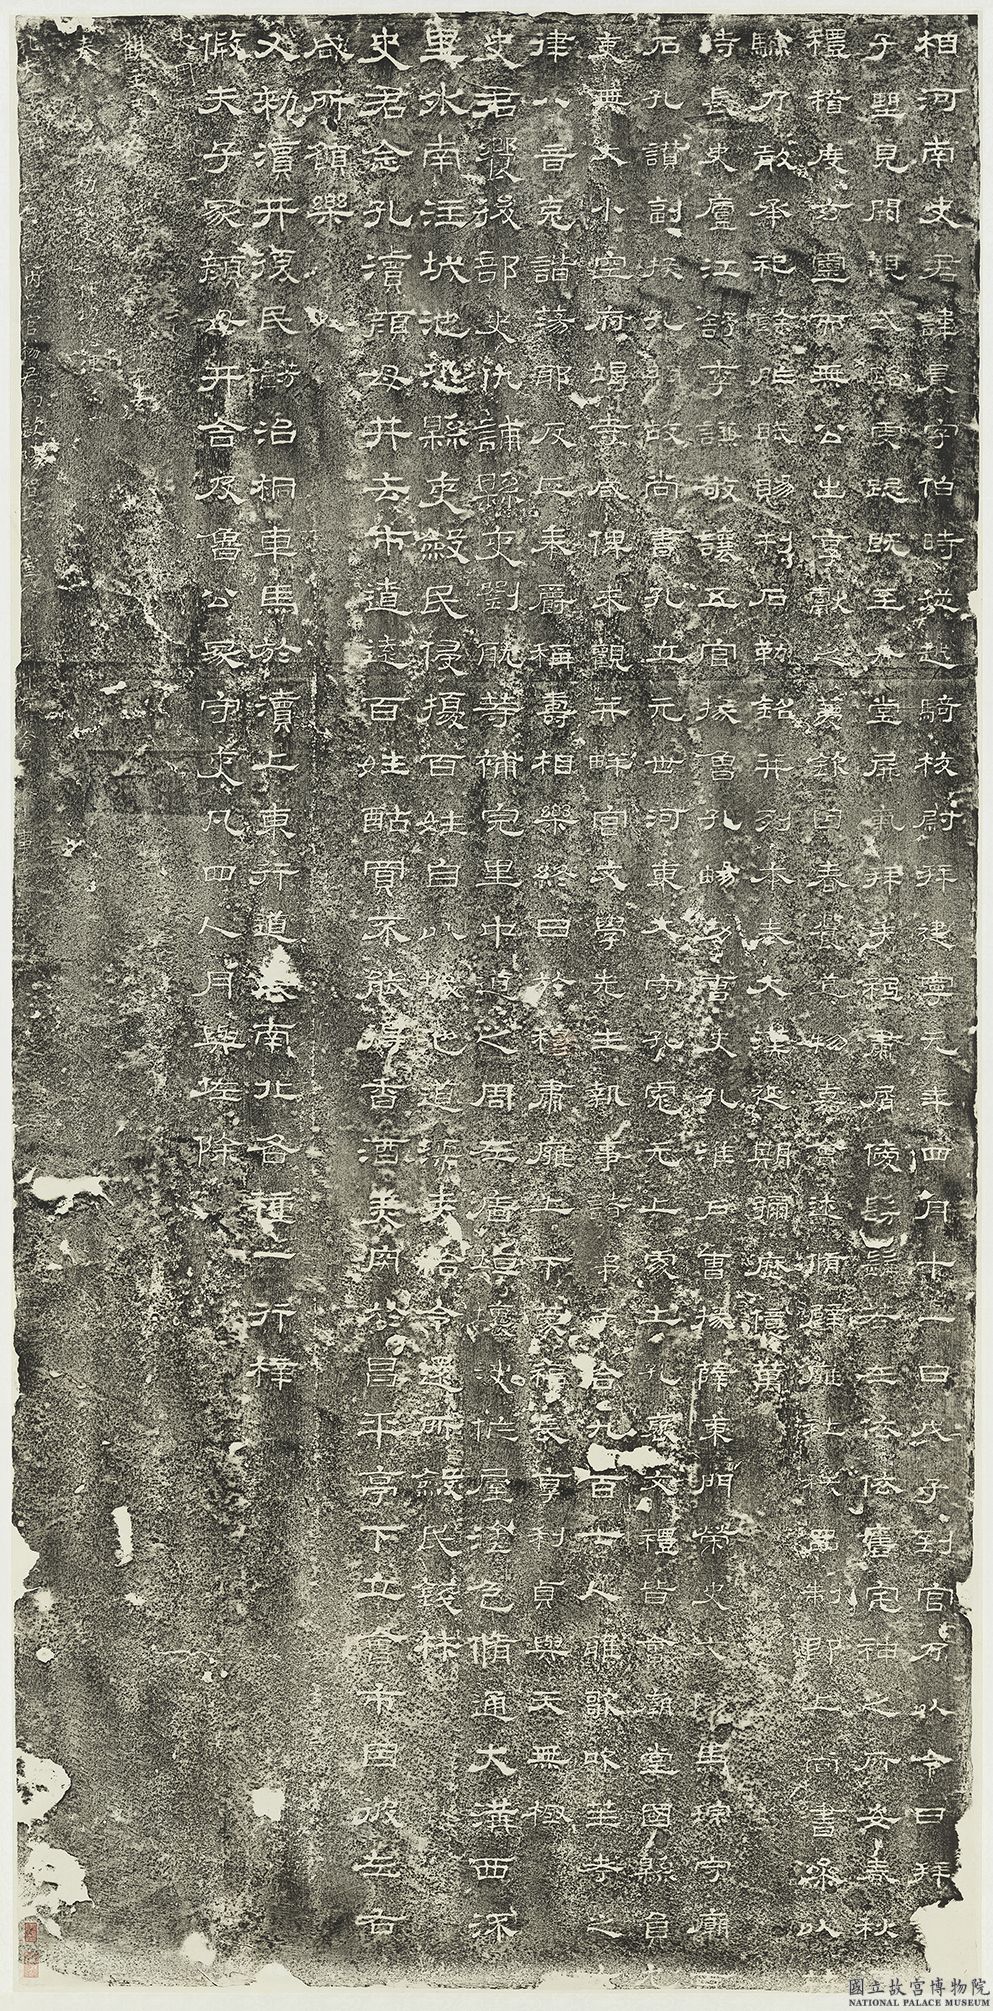 Posterior Face of the Shi Chen Stele